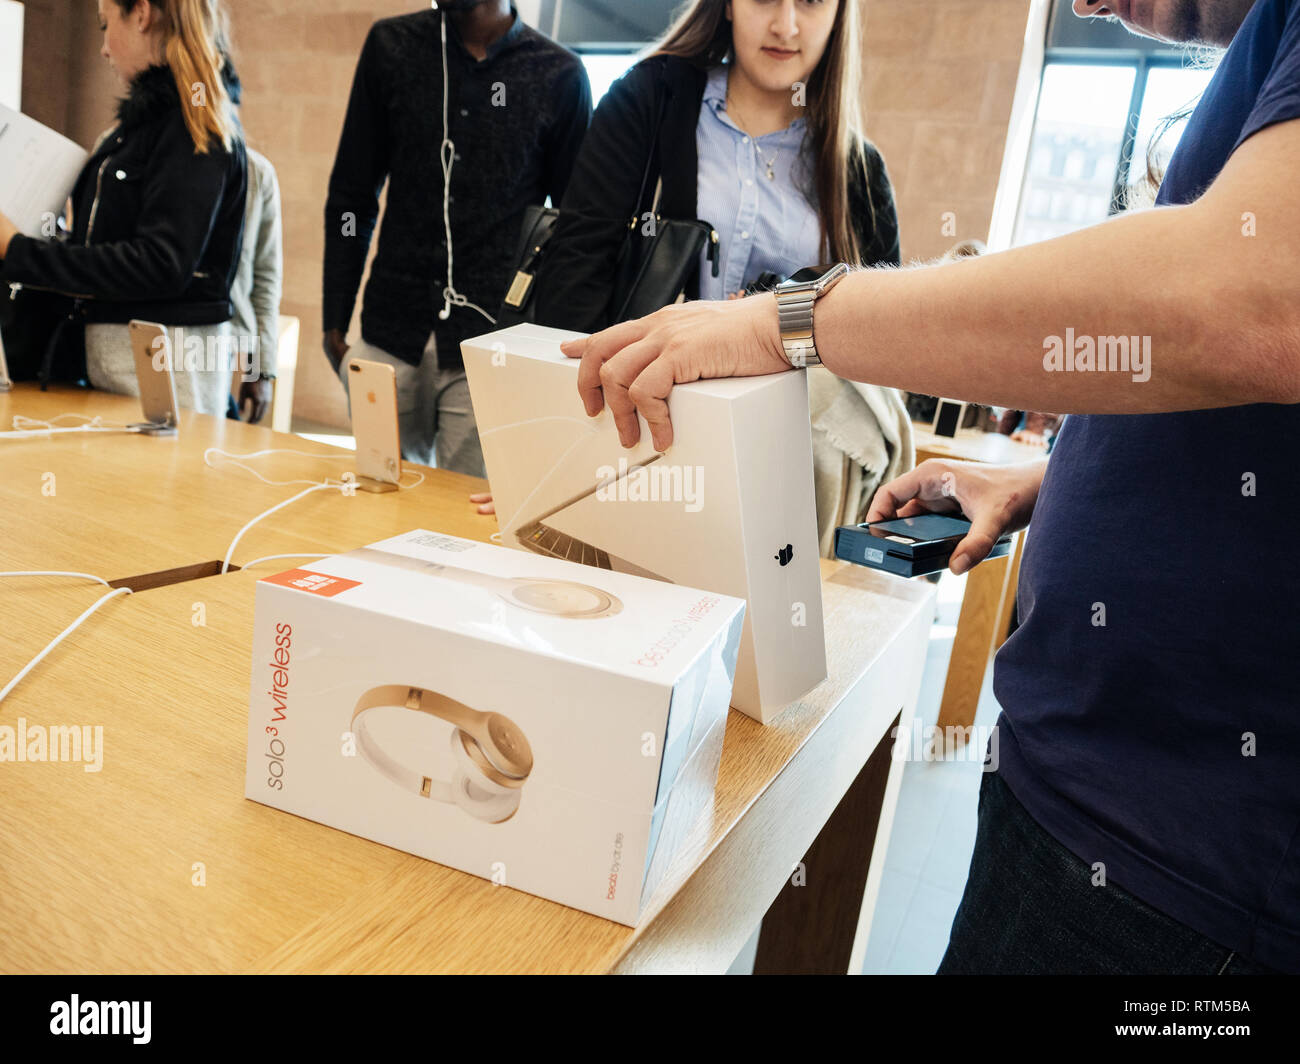 PARIS, FRANCE - SEP 22, 2017: New iPhone 8 and iPhone 8 Plus, as well the updated Apple Watch, Apple TV goes on sale today in Apple Store with young customer student buying Macbook Pro with Beats bu Dr Dre headphones Stock Photo